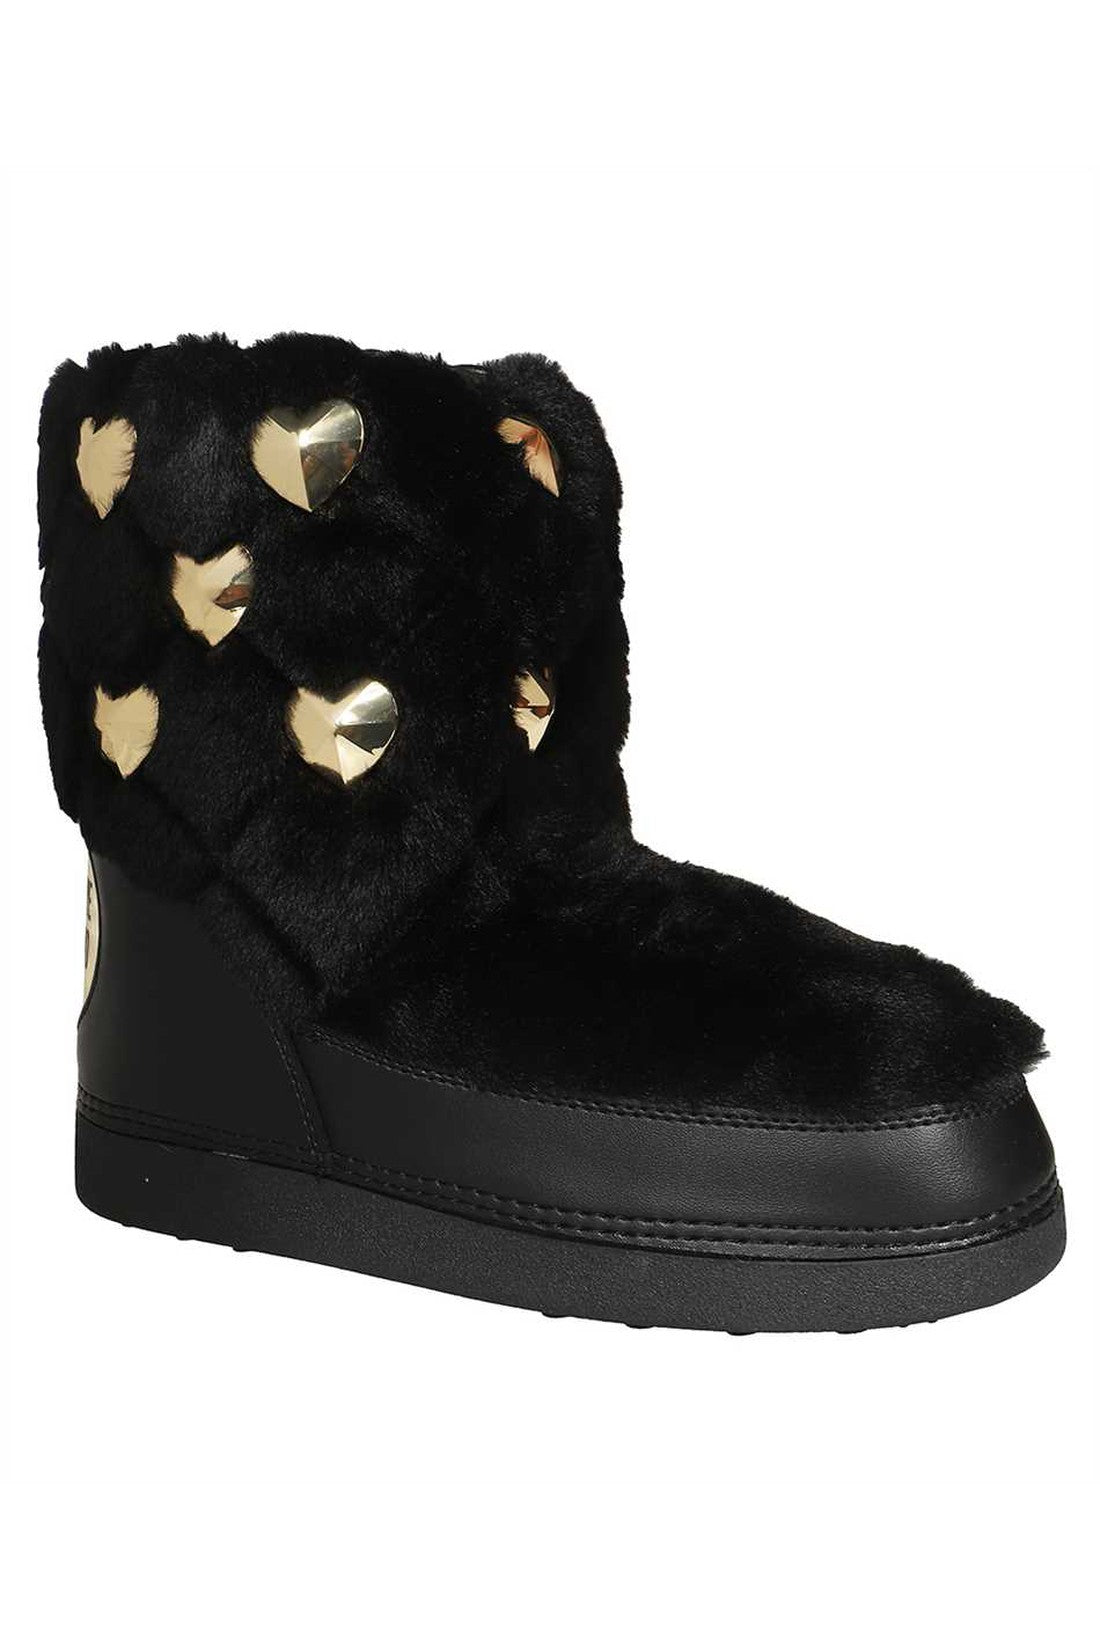 Ankle boots-Love Moschino-OUTLET-SALE-ARCHIVIST